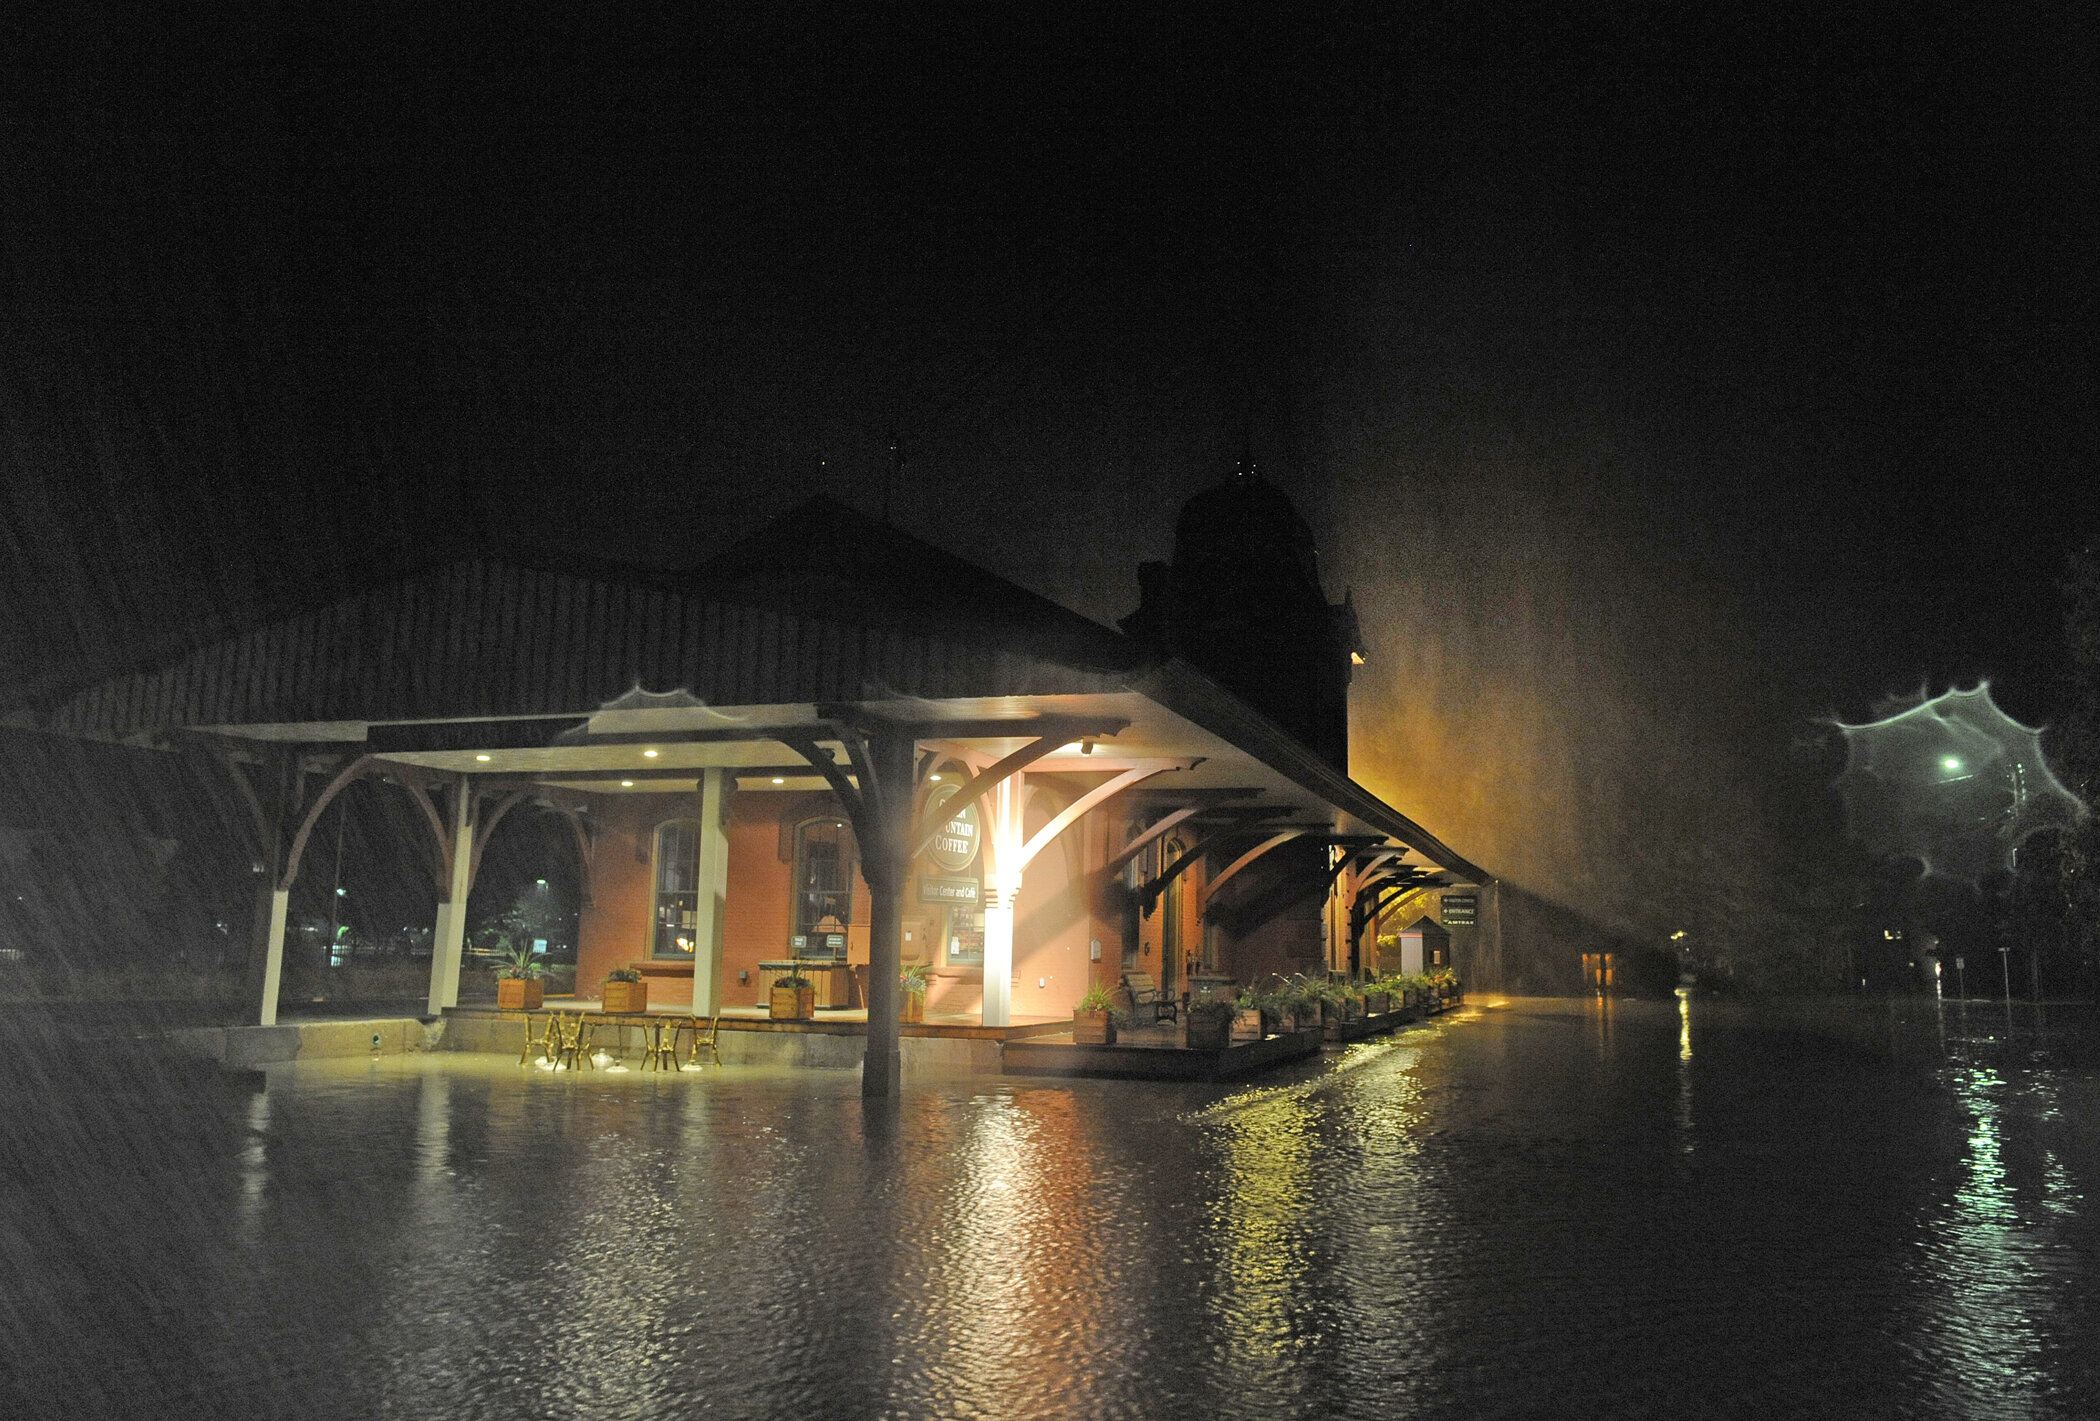  The Waterbury Train Station is surrounded by water several feet deep. Photo by Gordon Miller 